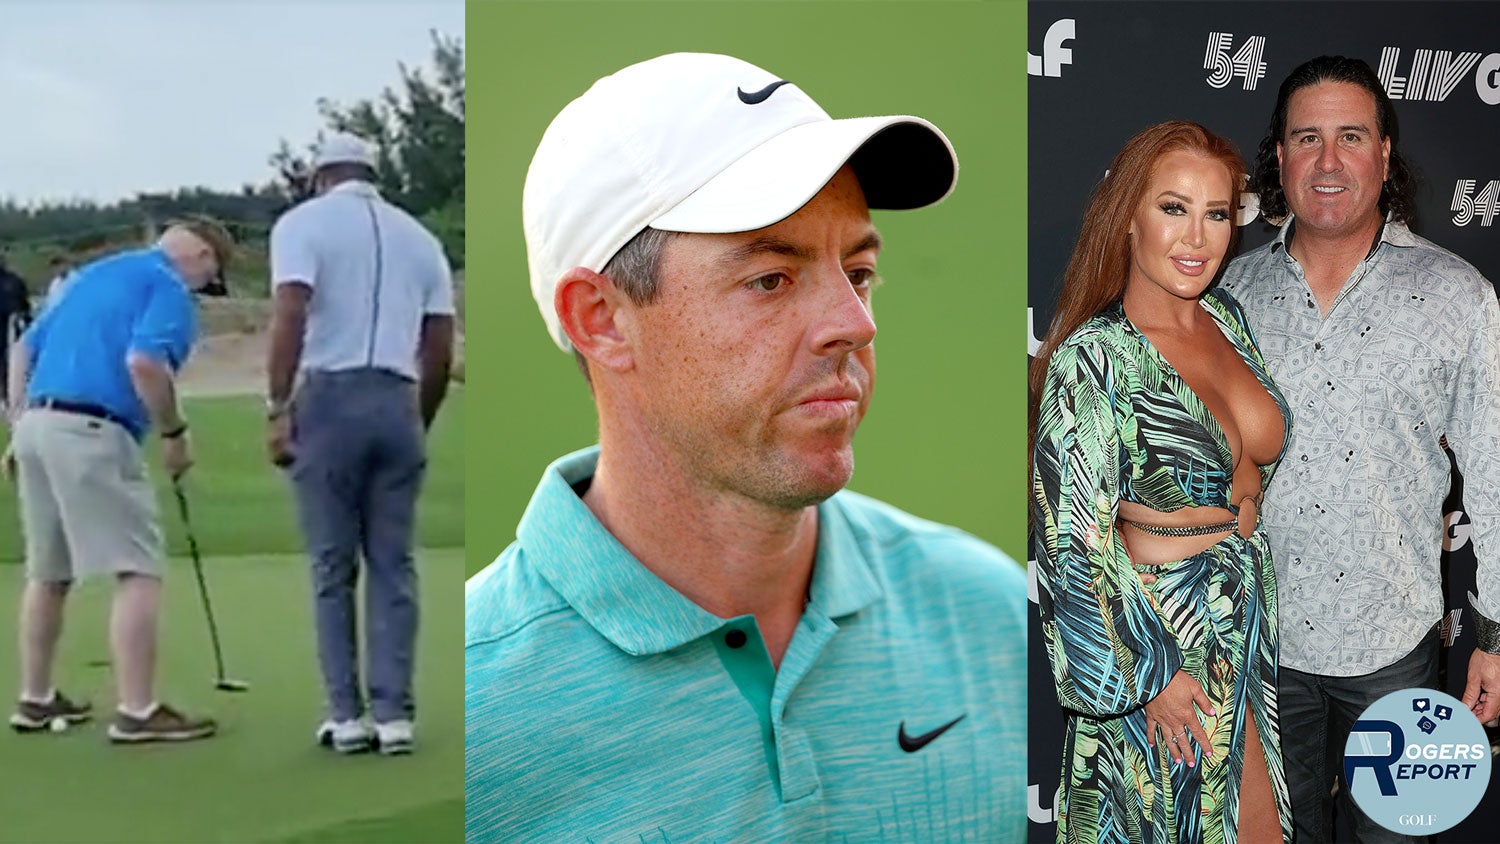 A lesson from Tiger, Rory's feud and Ashley Perez's comments